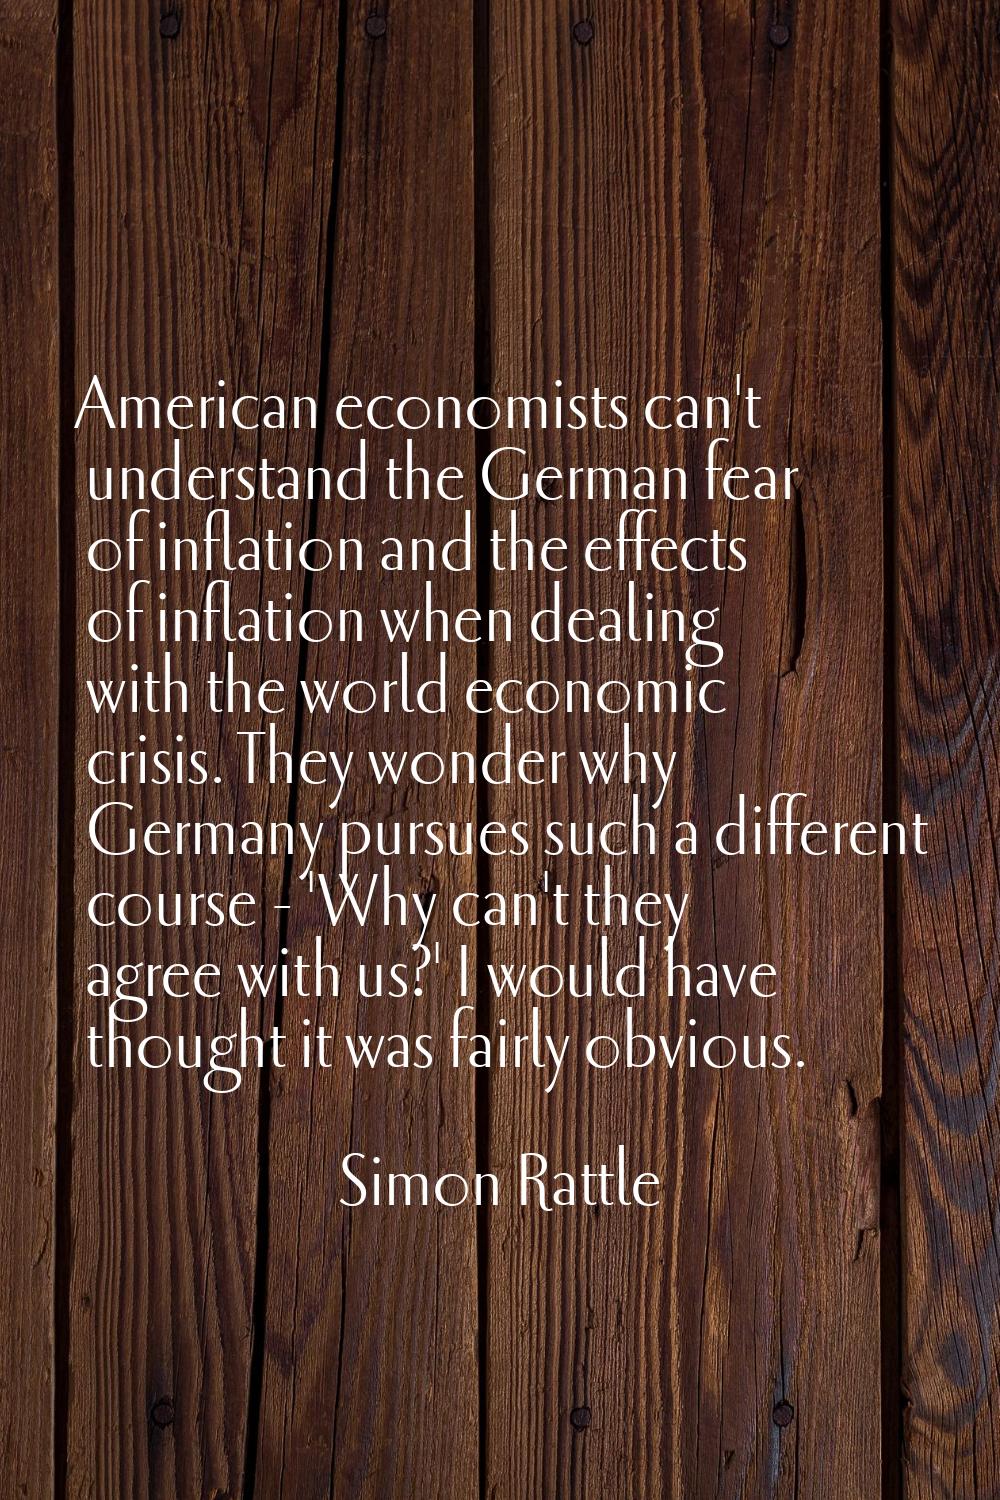 American economists can't understand the German fear of inflation and the effects of inflation when